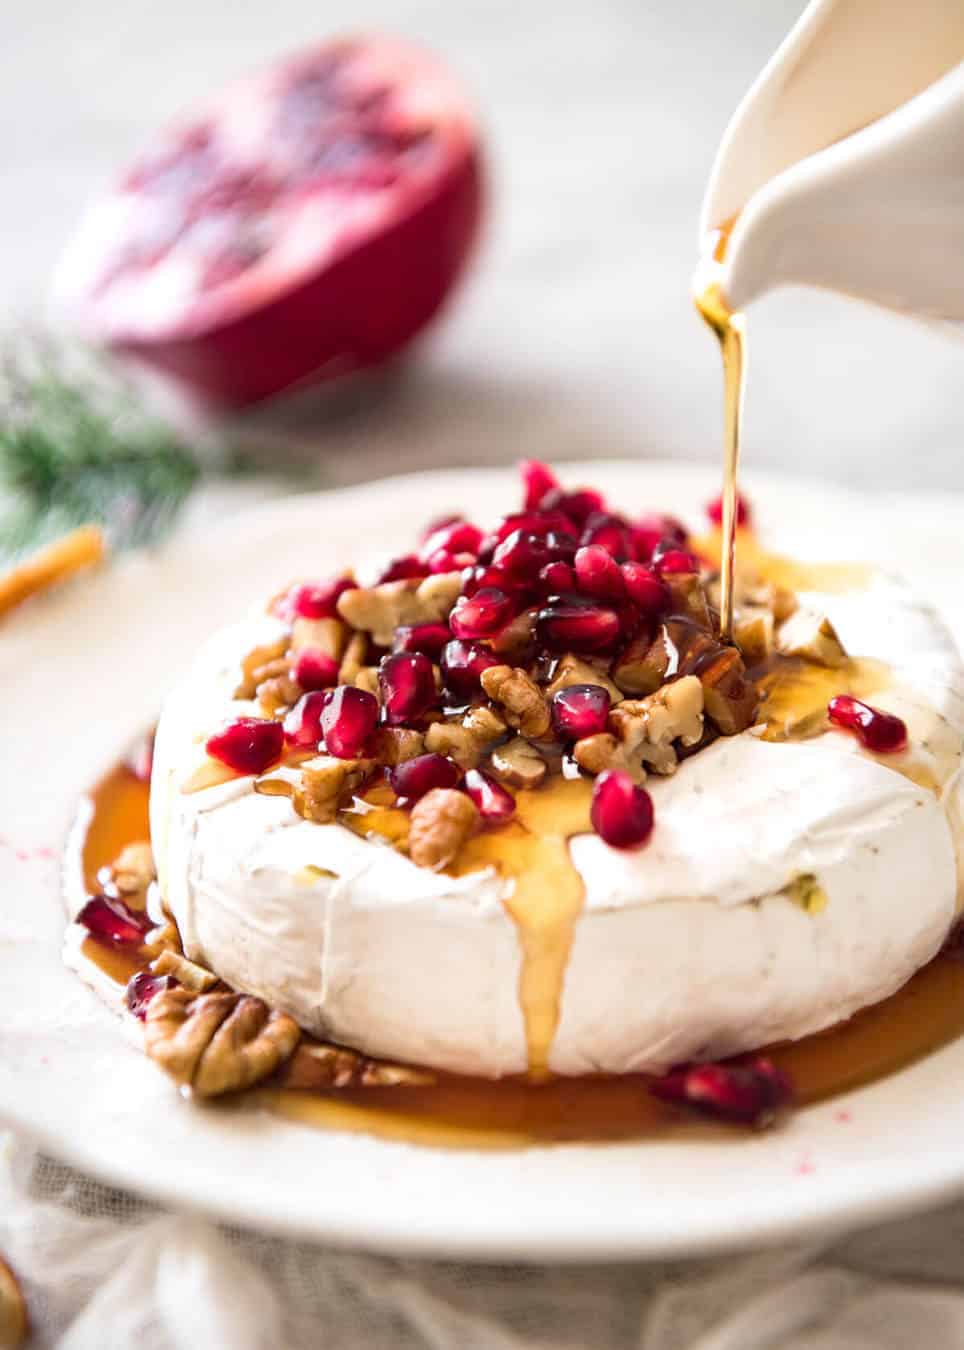 3 Minute Melty Festive Brie - Just microwave for 1 minute and you have an almost-instant baked brie appetizer! www.recipetineats.com